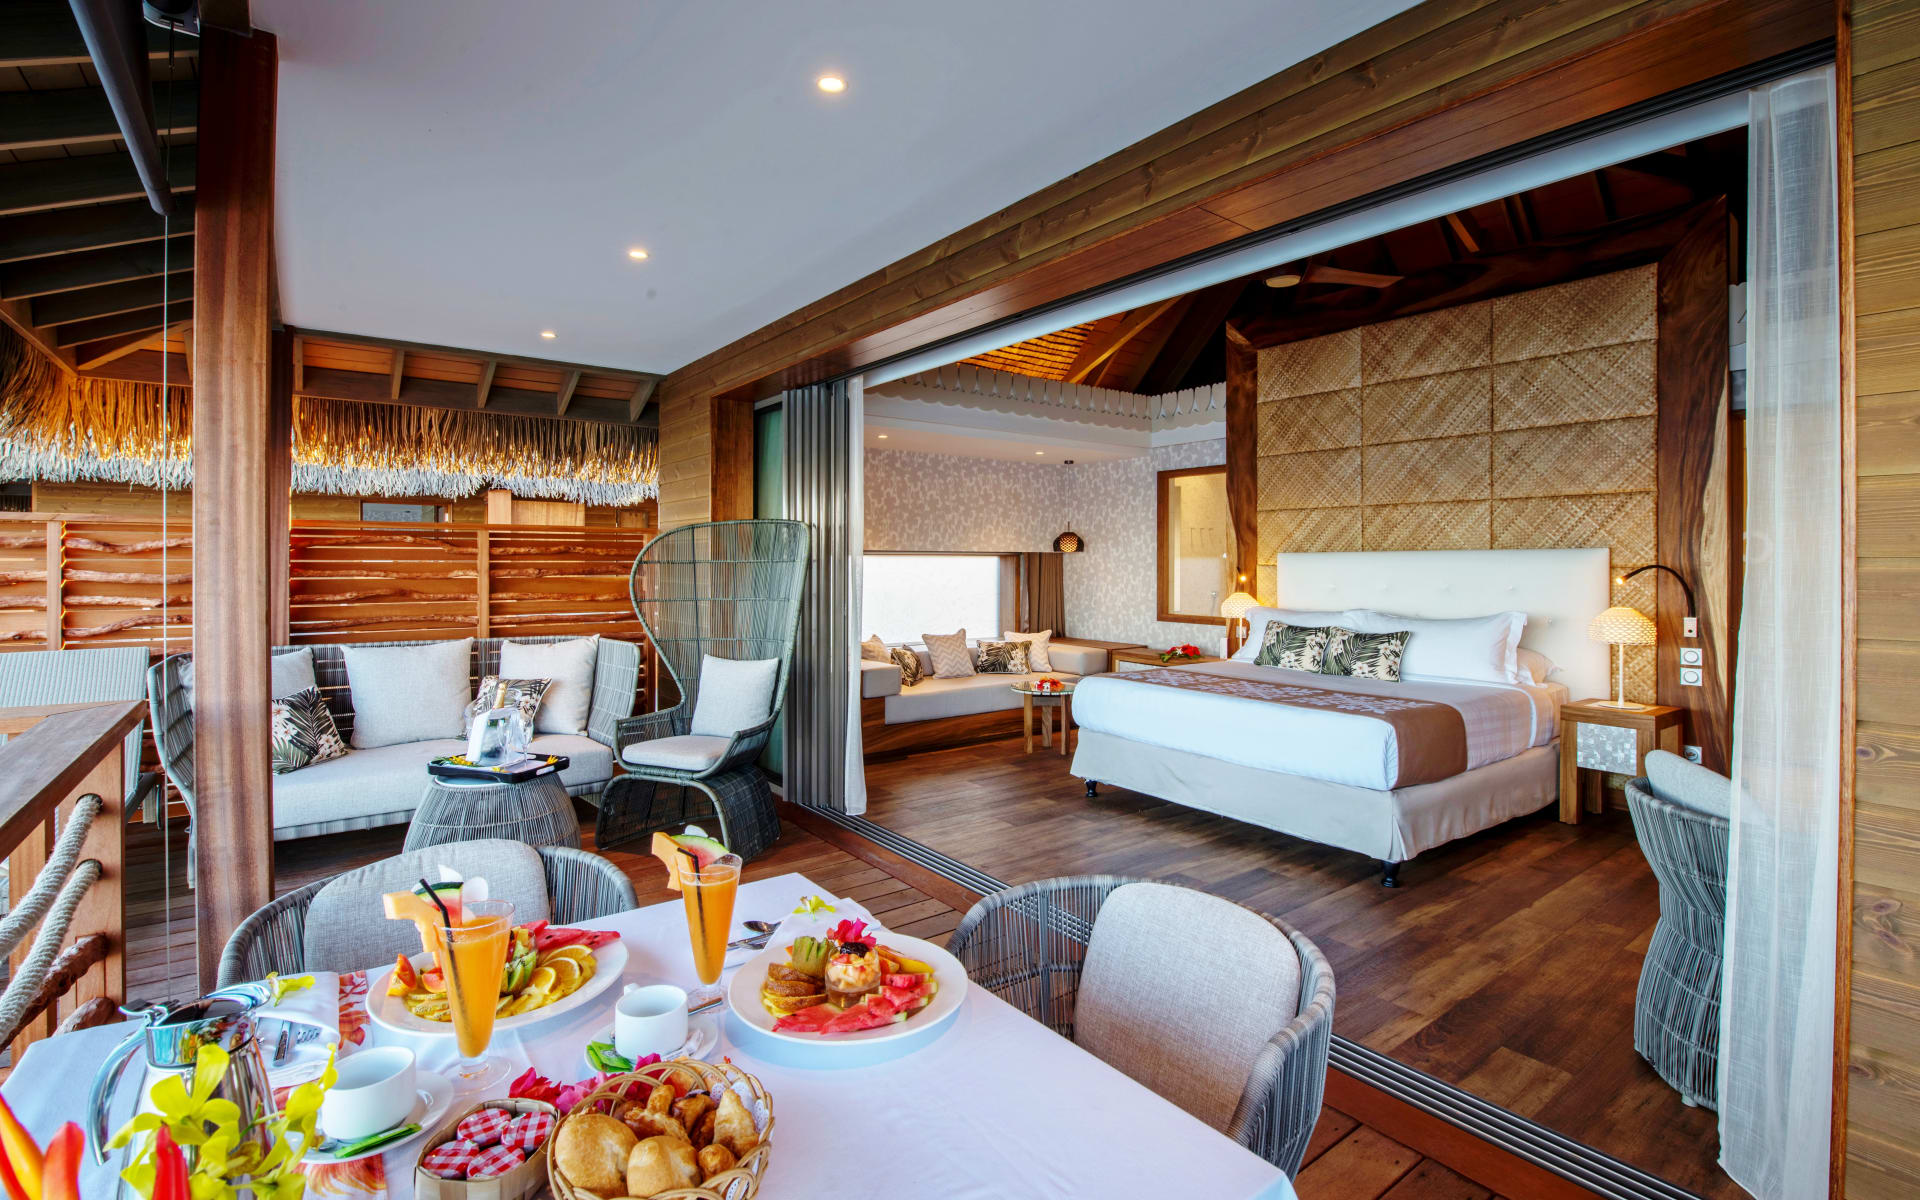 The overwater villa suite has breakfast laid out on the table.